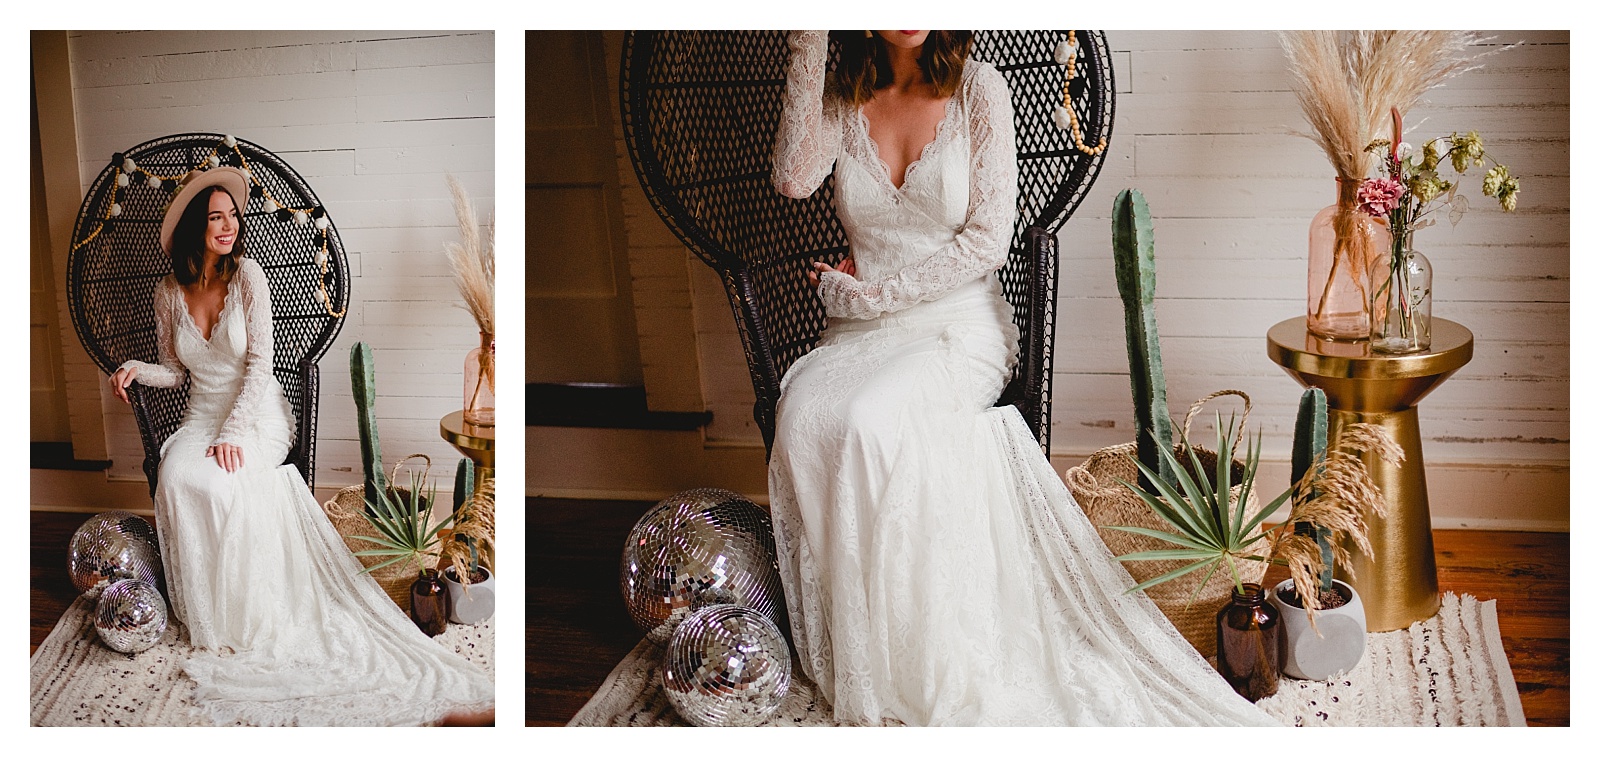 Bridal portraits by north Florida photographer. Shelly Williams Photography